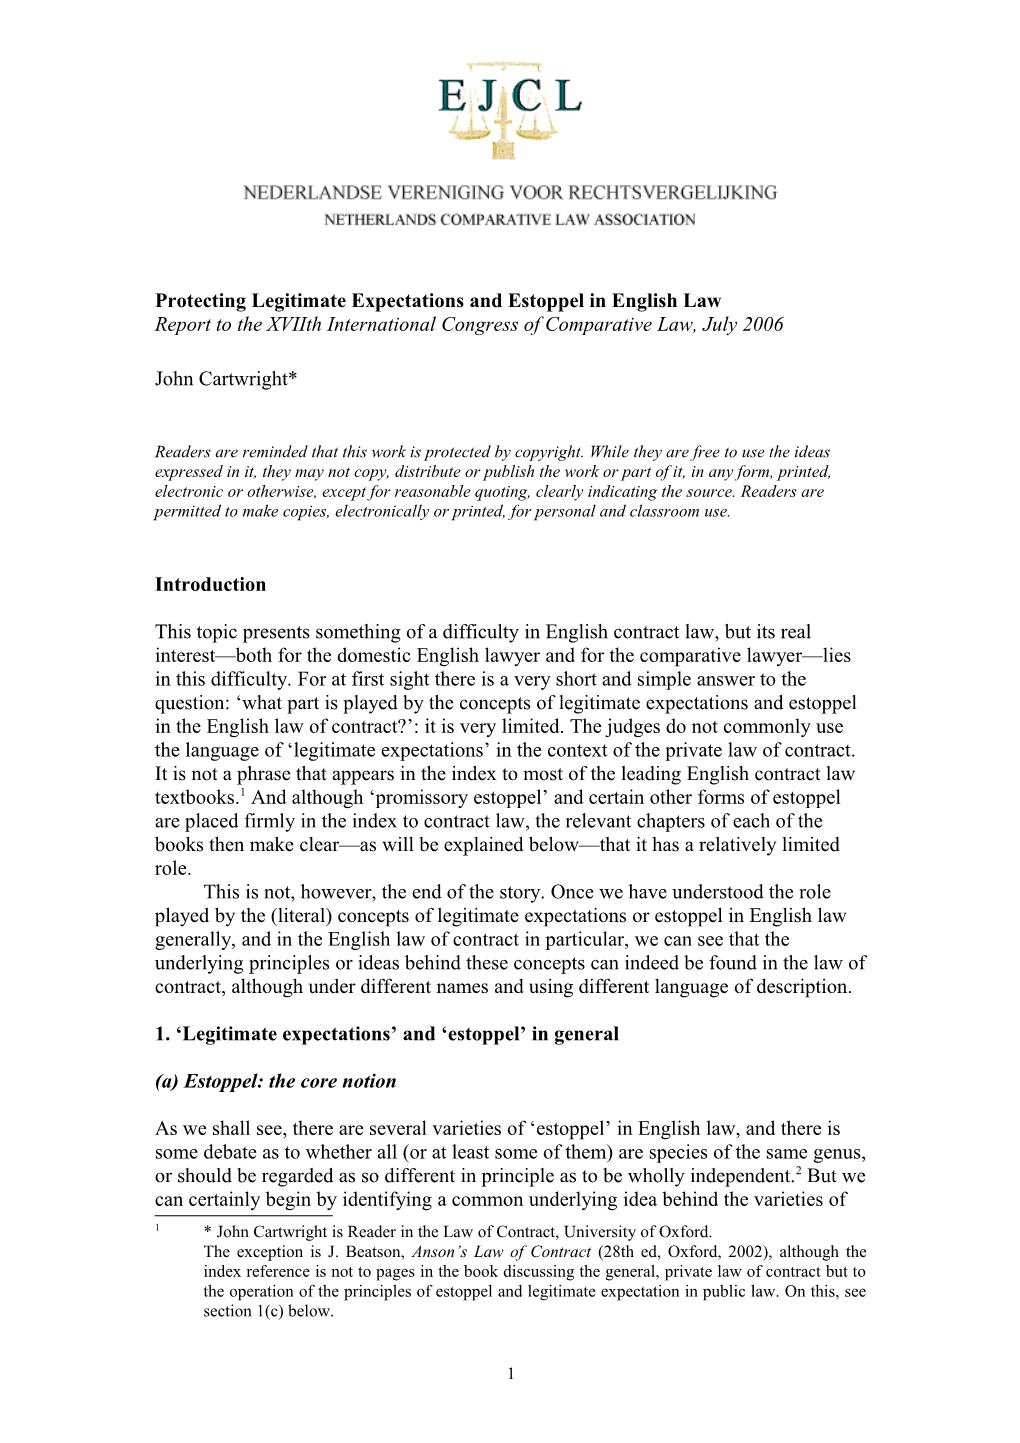 Protecting Legitimate Expectations and Estoppel: English Law